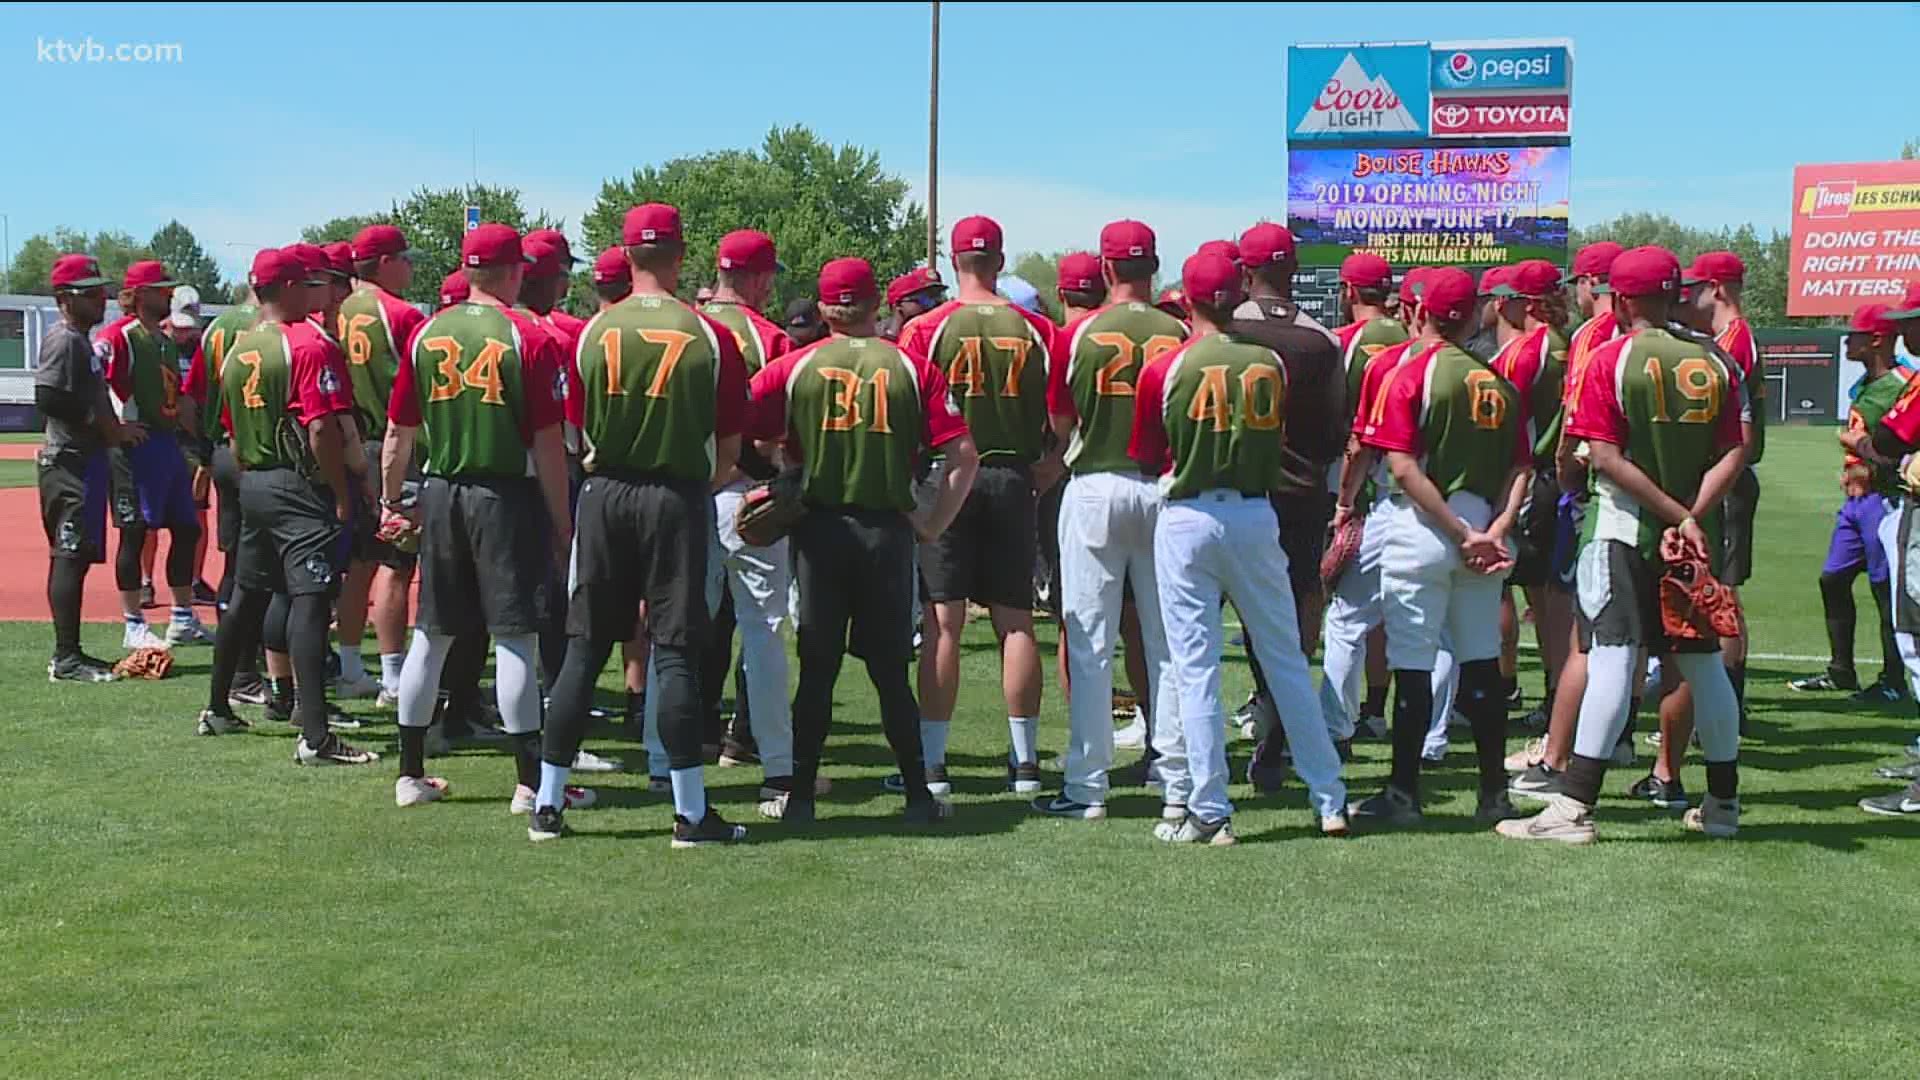 The team will join the independent Pioneer League, which has teams in Idaho, Utah, Montana and Colorado.